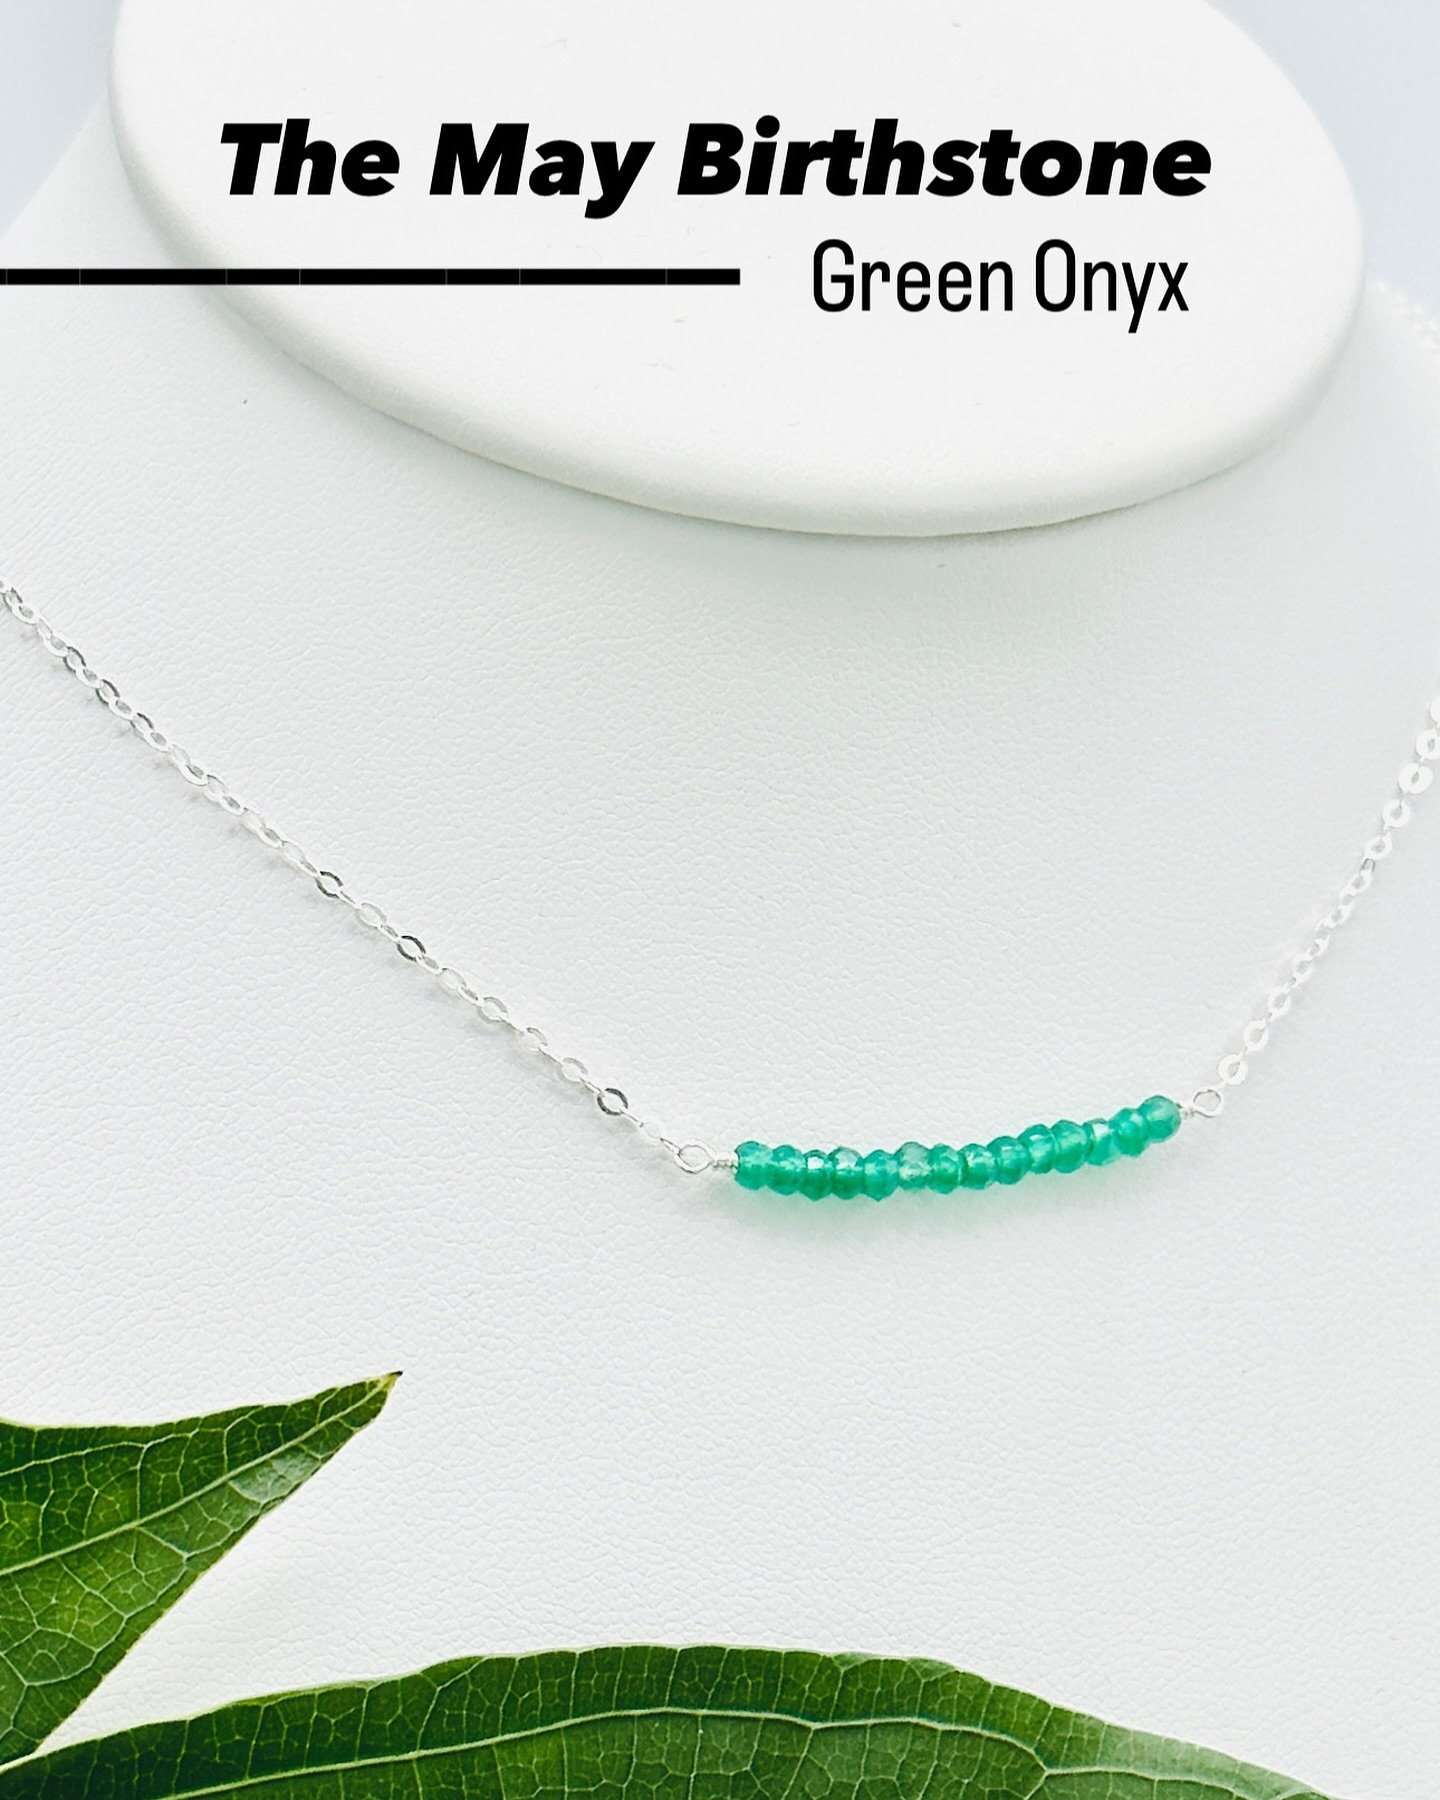 🌿Happy Birthday May Babies! 🥳

Who's got a May birthday that needs celebrating? We at Abaloria Jewelry offer Green Onyx as the birthstone, our birthstone necklace is a very sweet yet cool bar style necklace in sterling silver. A perfect gift for a 